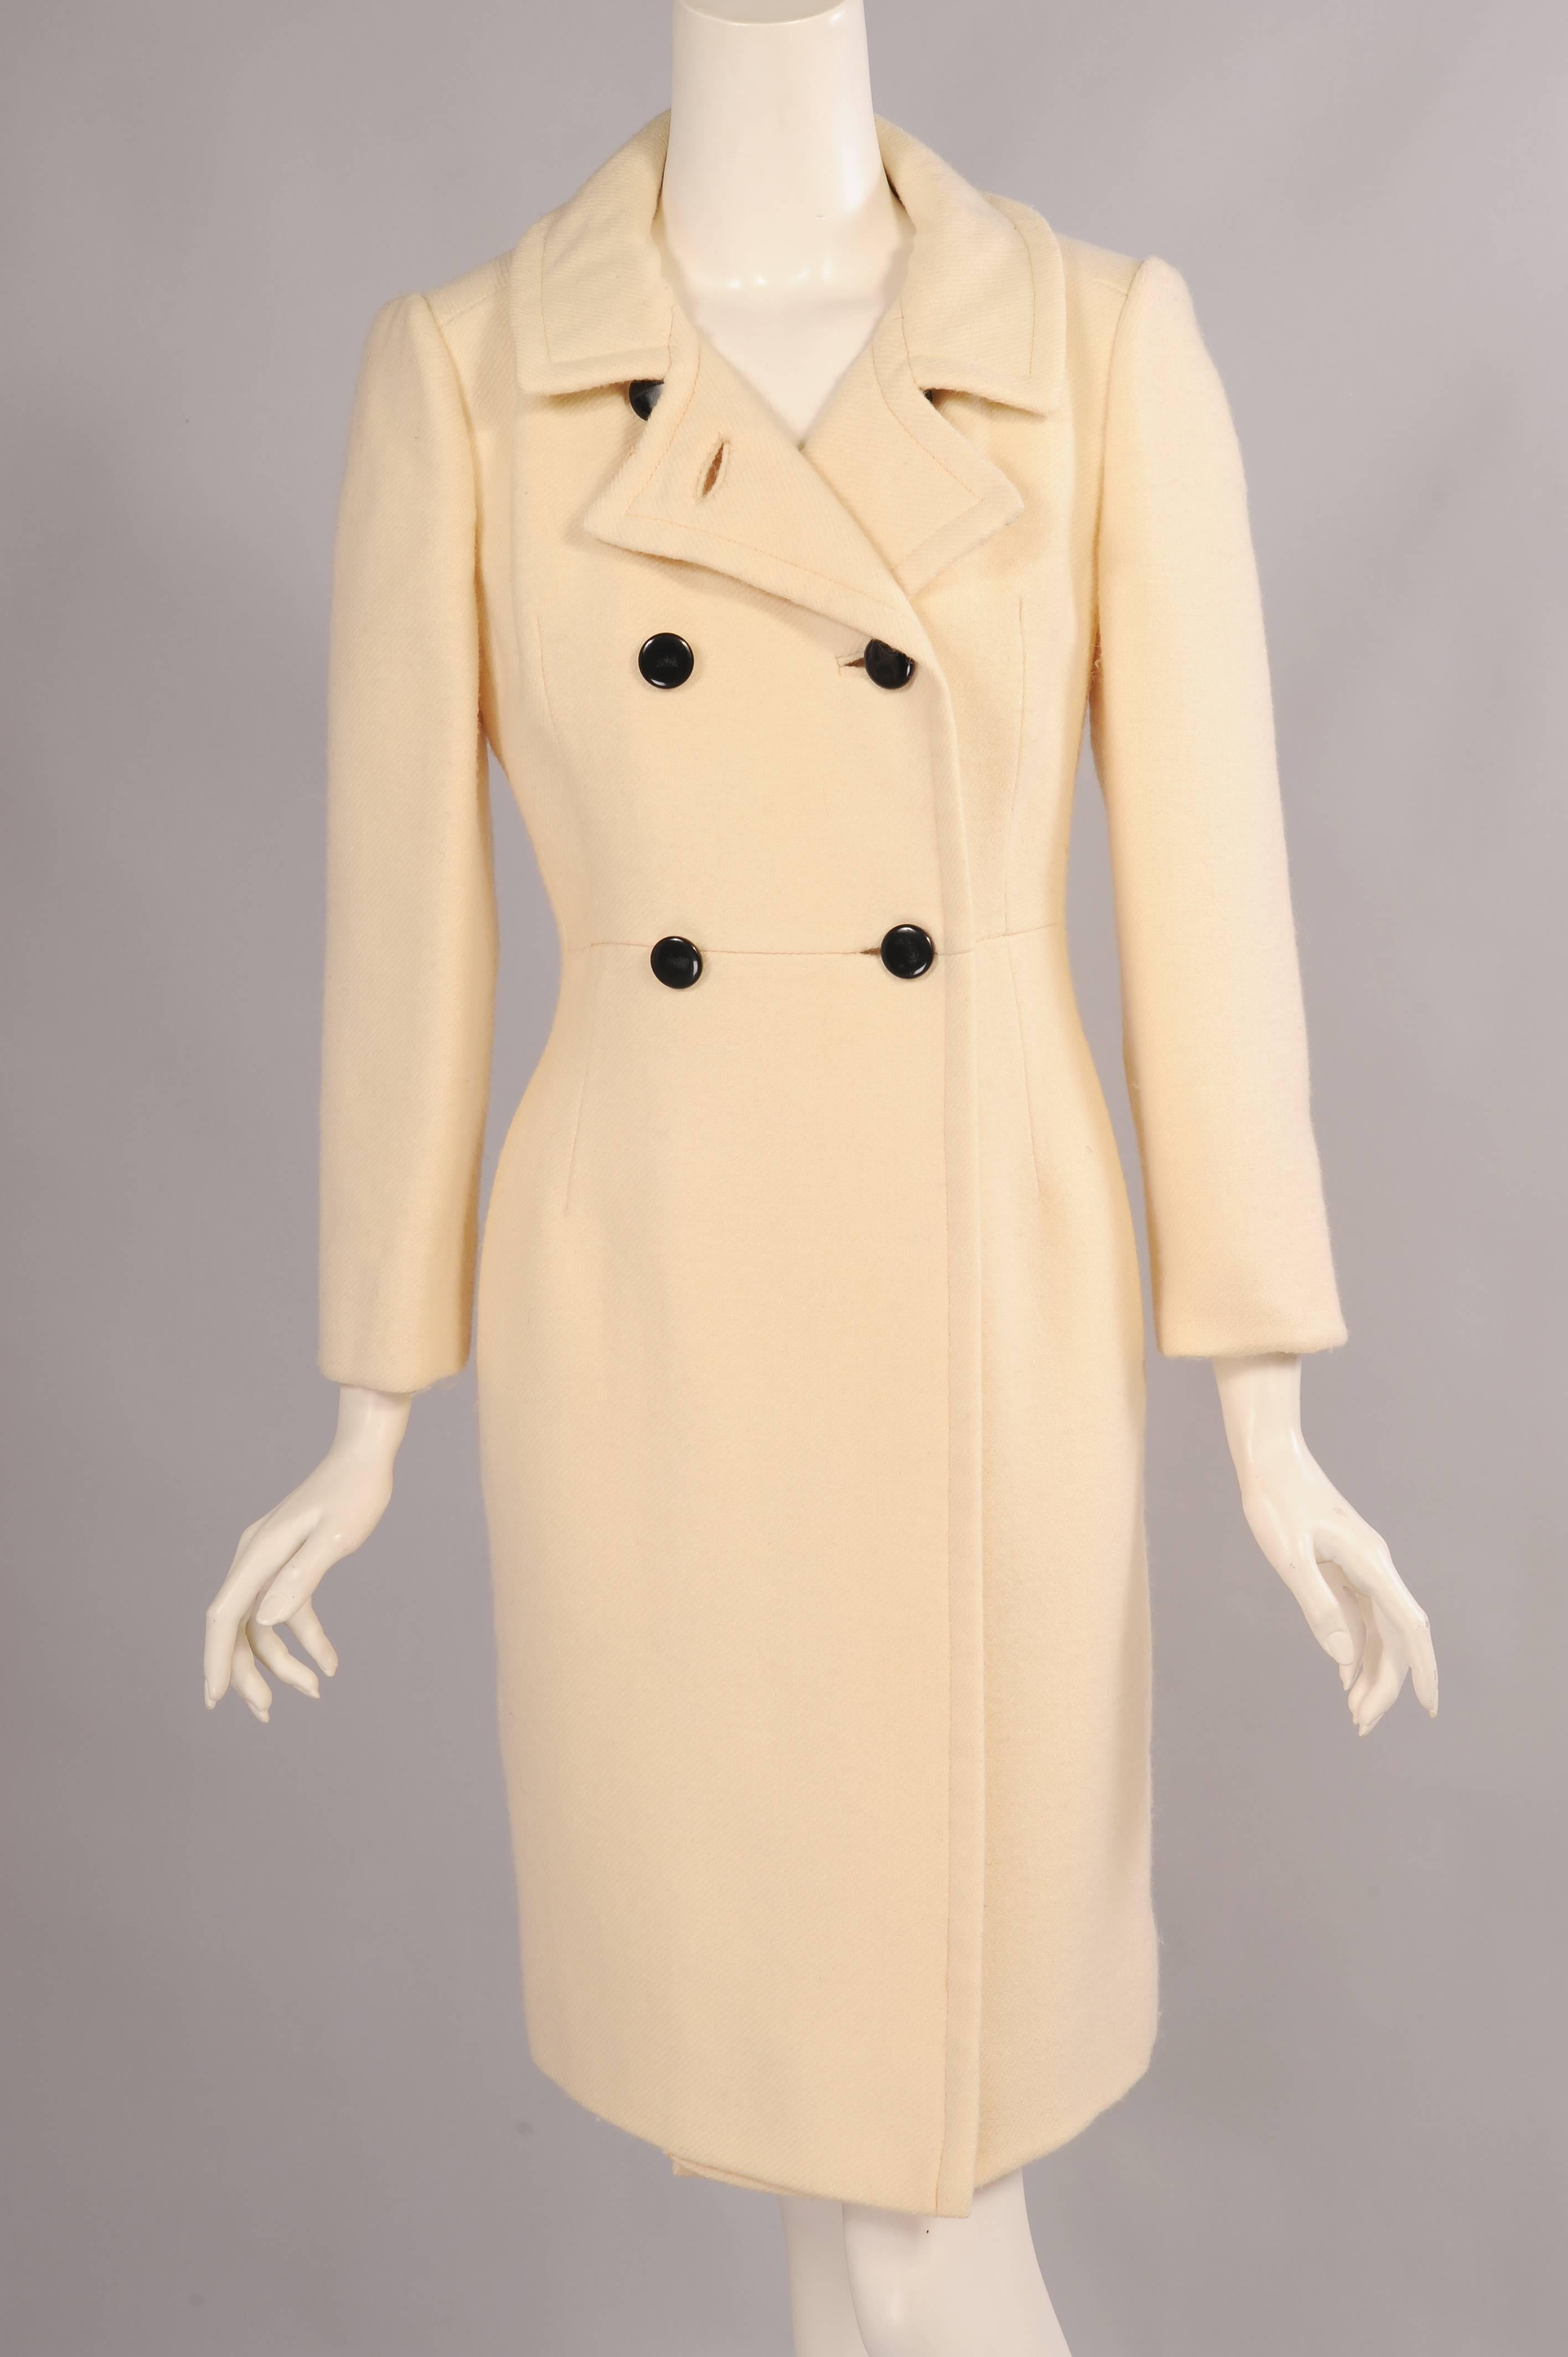 Cream colored wool, accented with six black buttons is used for this crisp, clean lined coat from the 1960's. Retailed by Bonwit Teller it is fully lined and in excellent condition.
Measurements;
Shoulders 16"
Bust 39"
Waist